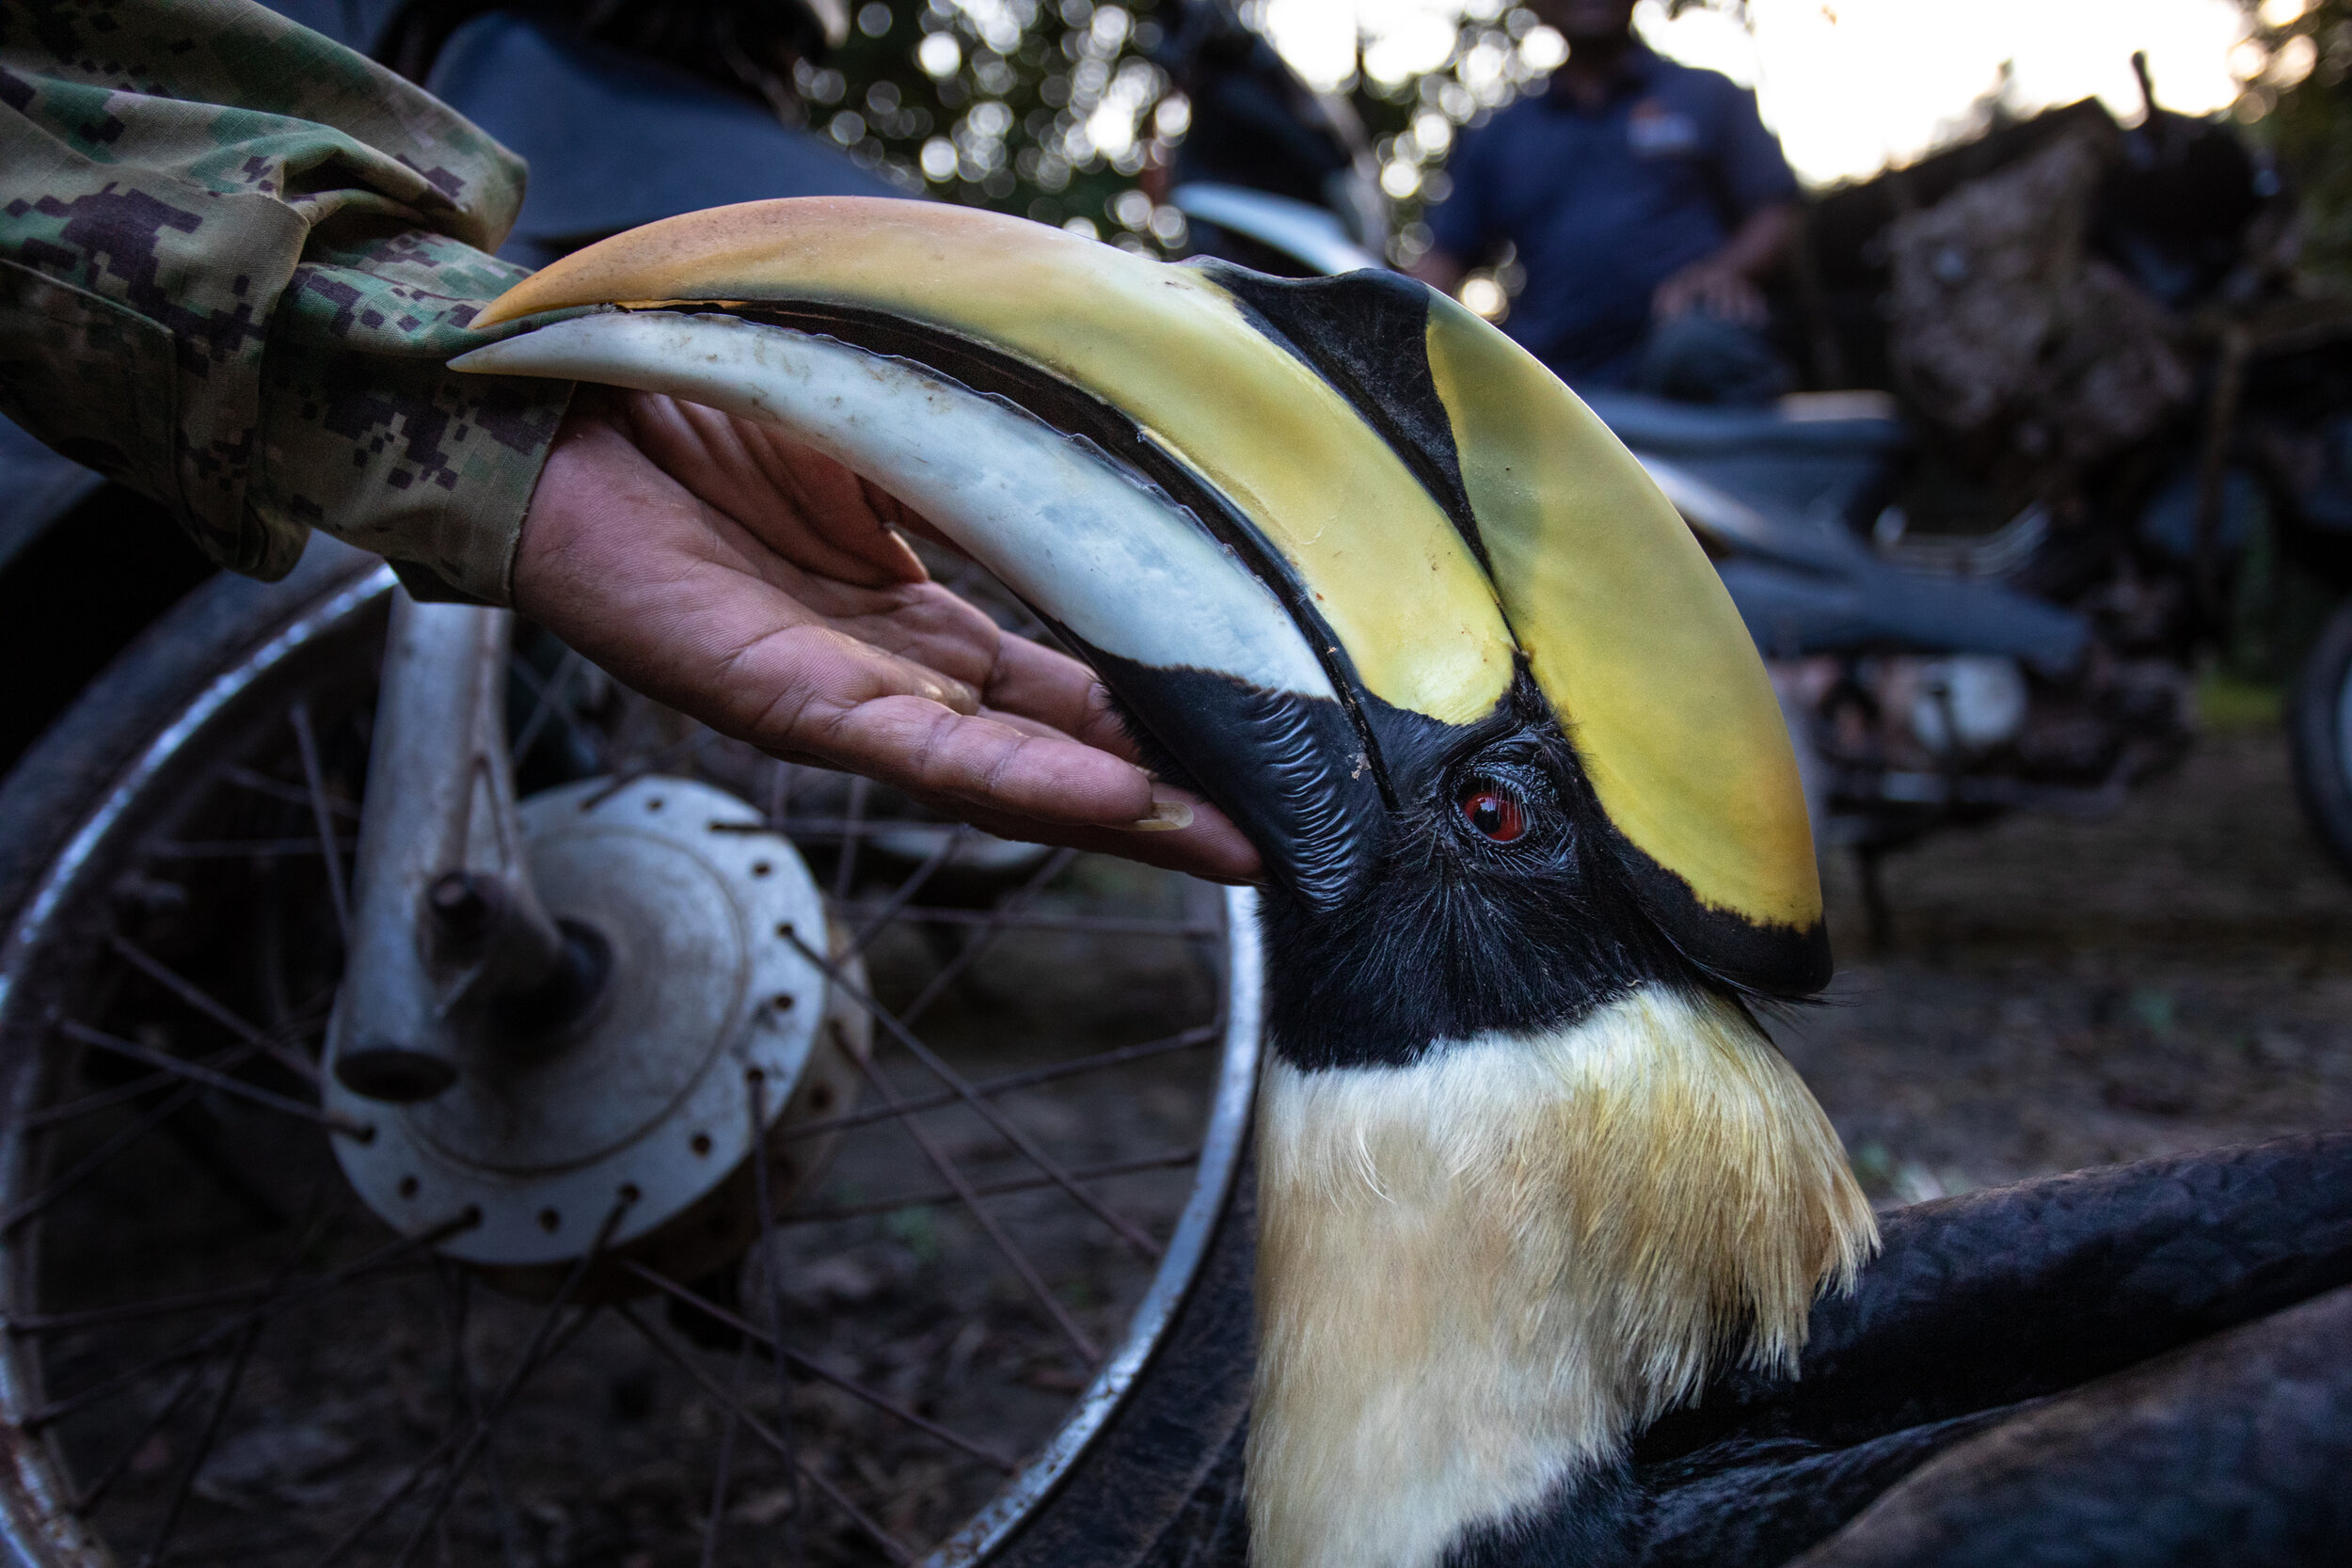  A Wildlife Alliance ranger plays with Joa, a great hornbill that was rescued as a chick in 2016. Joa is now released into the wild but his diet is supplemented by Wildlife Alliance keepers at the Wildlife Release Station located deep in the Cardamom